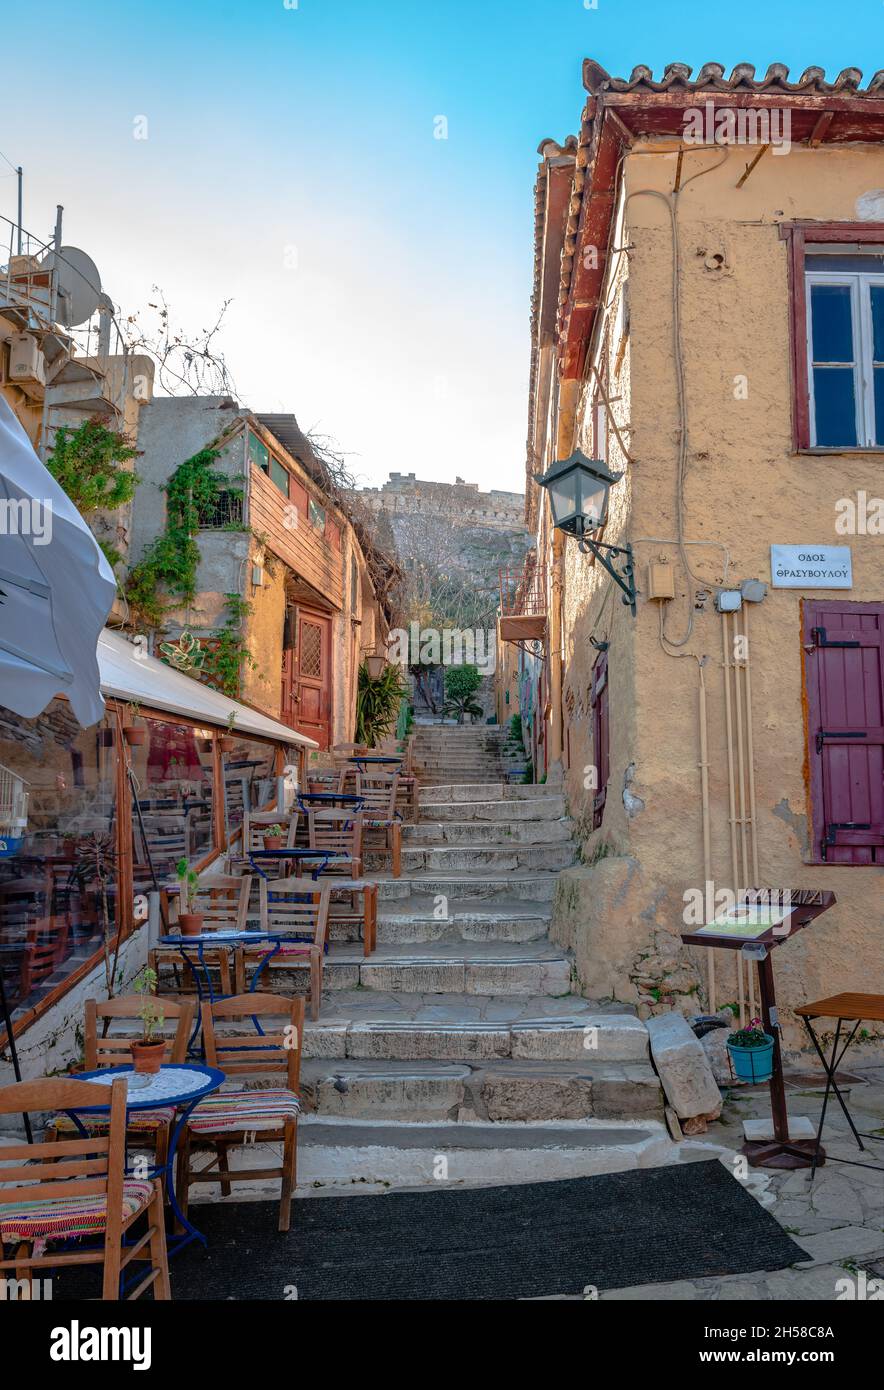 Sidewalk cafe in Plaka district, clustered around slopes of the Acropolis, with labyrinthine streets and neoclassical architecture. Athens, Greece. Stock Photo